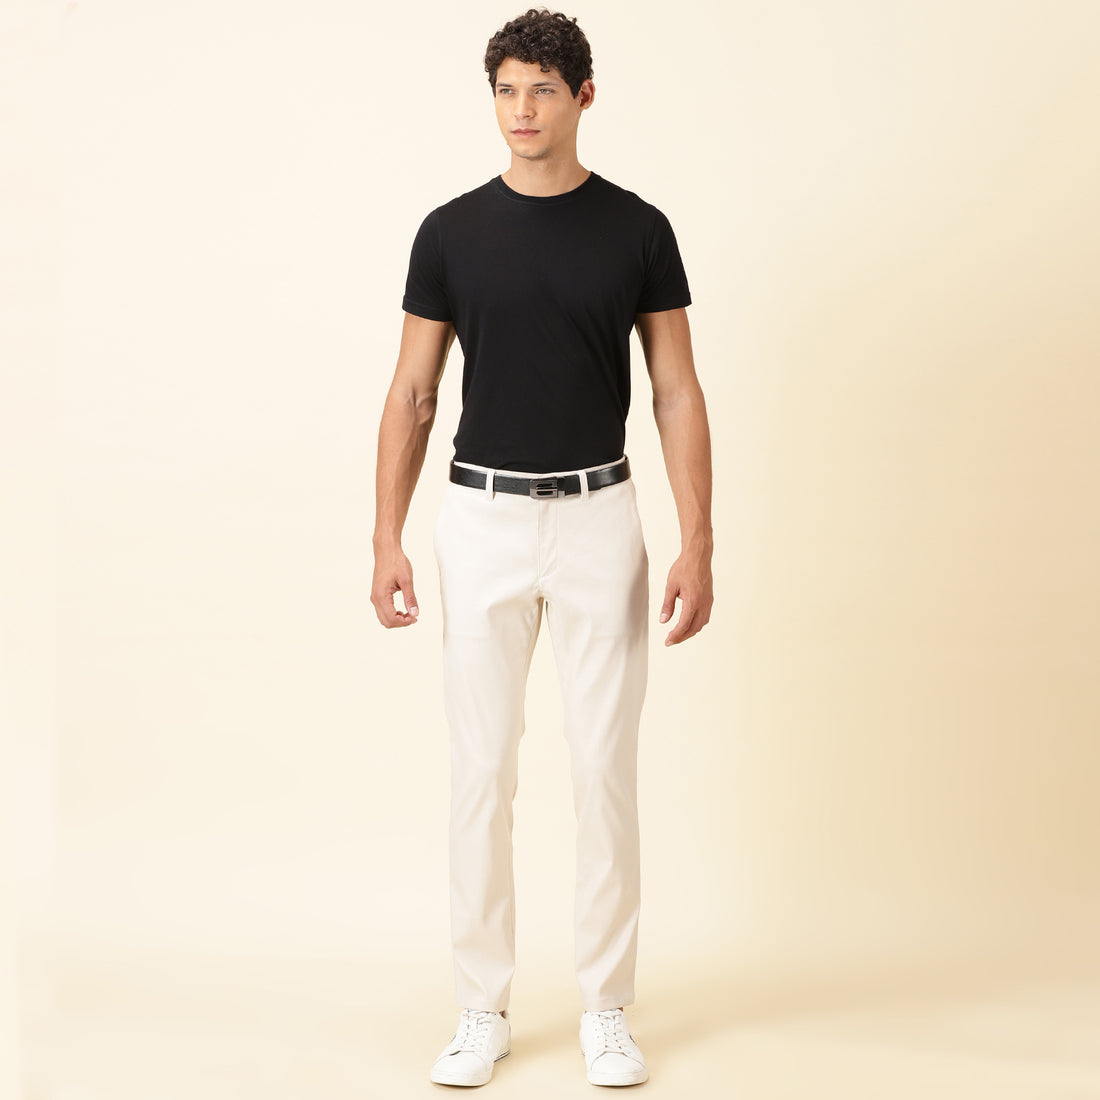 Slim Fit Elasticized Crossover Chinos - French Oak